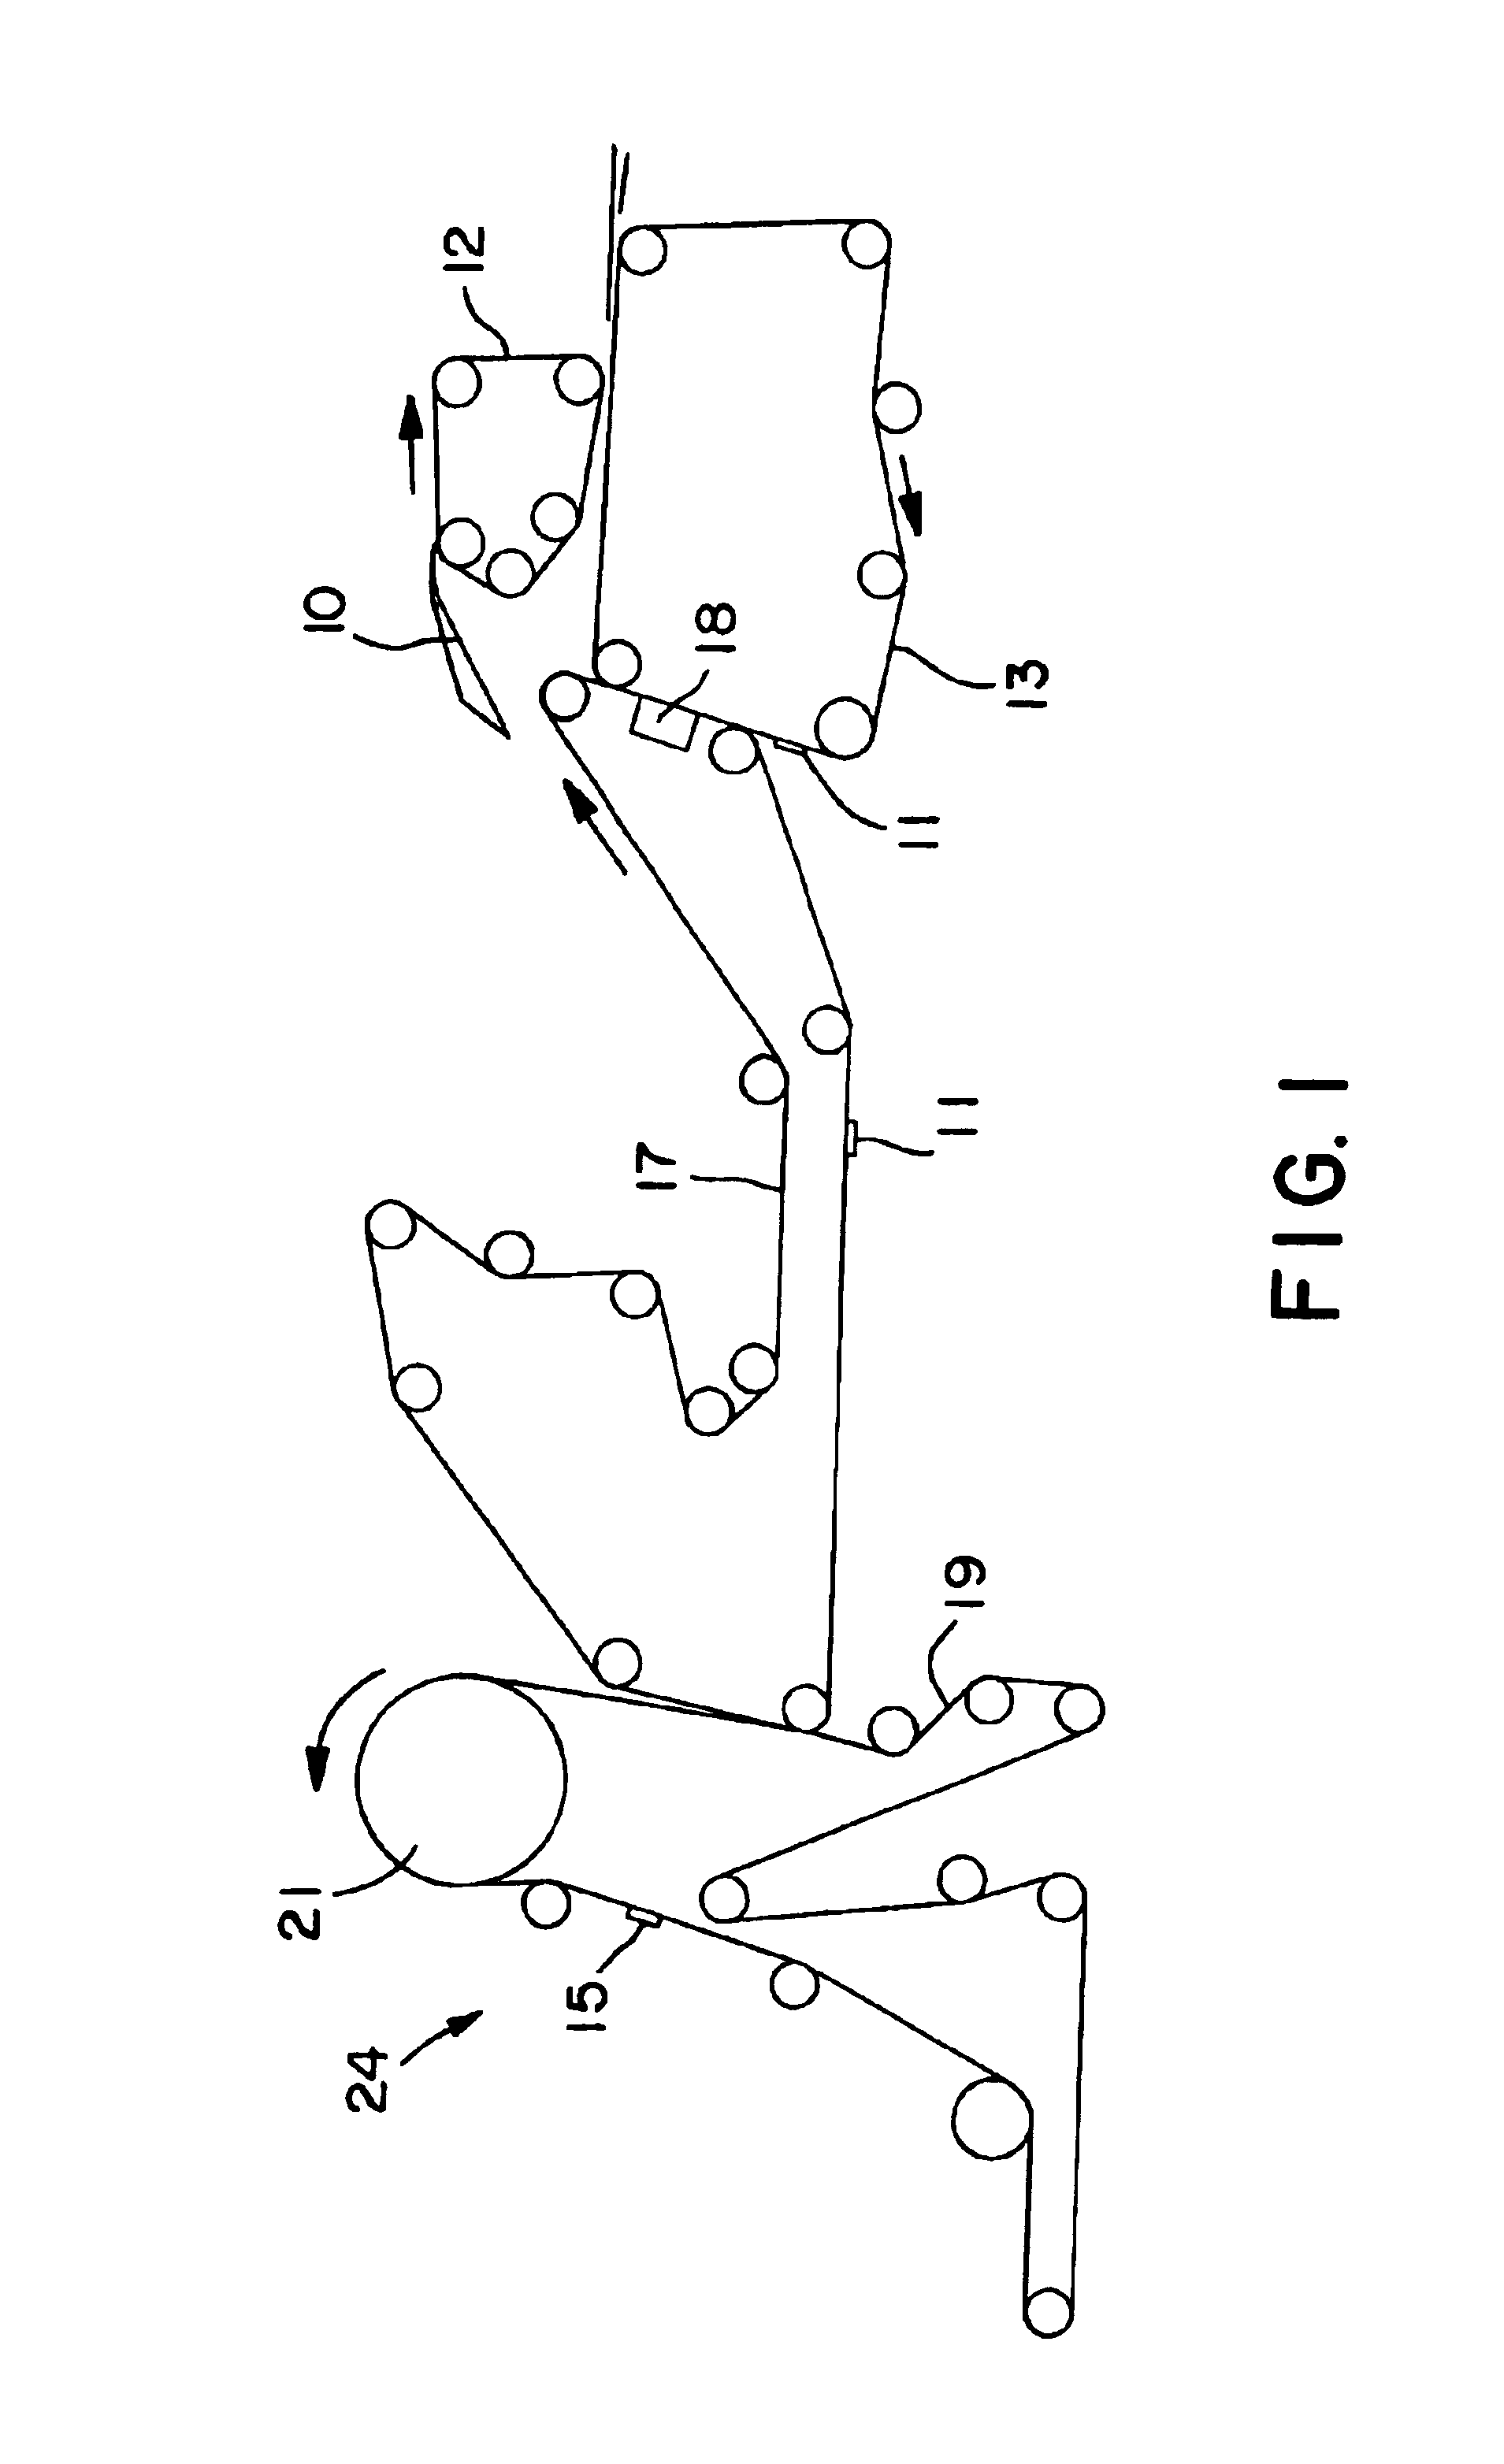 Method for applying softening compositions to a tissue product